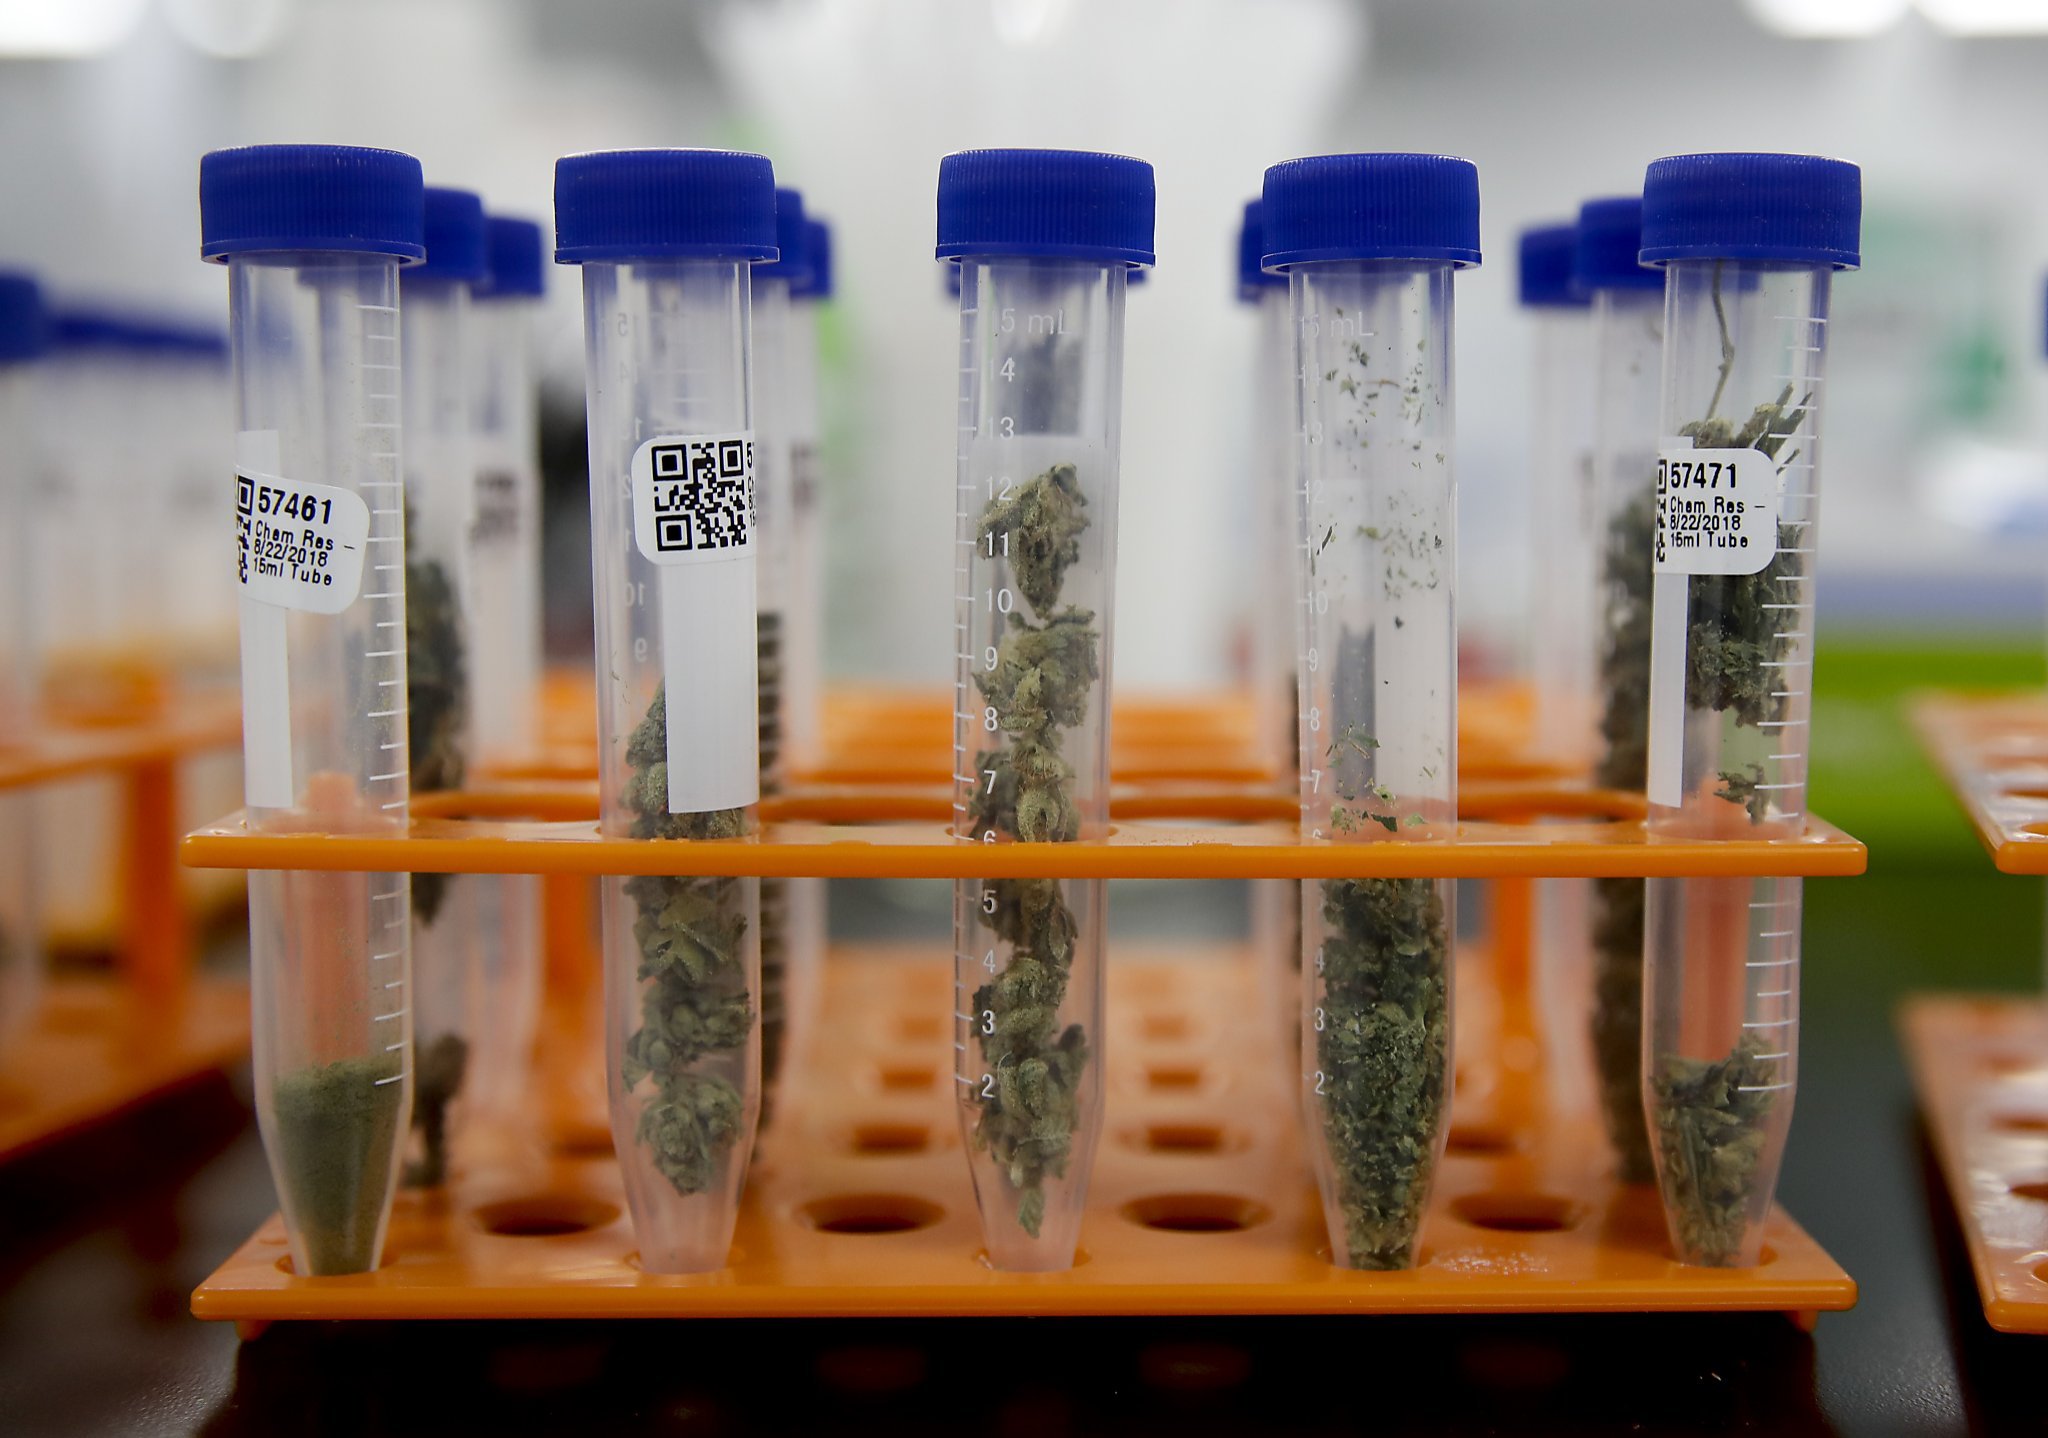 The recall of tens of thousands of pounds of marijuana and other products after a Sacramento laboratory was caught faking pesticide test results has jolted a cannabis industry that has struggled for legitimacy in its first year facing a full-slate of state regulations.